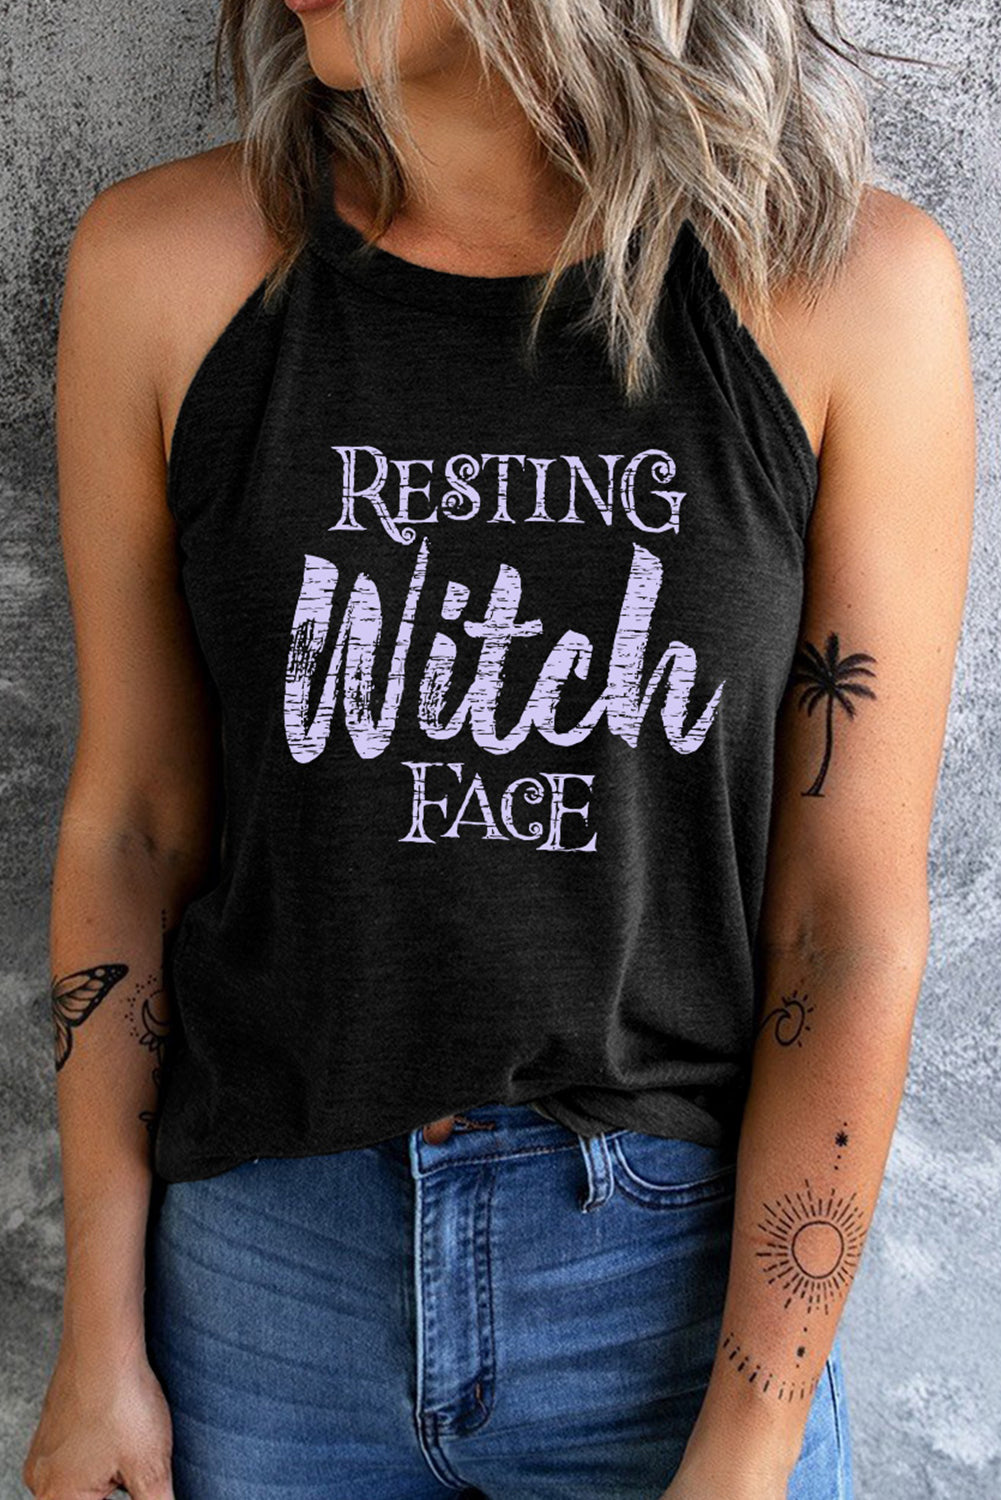 Round Neck RESTING WITCH FACE Graphic Tank Top - Black / S - Women’s Clothing & Accessories - Shirts & Tops - 1 - 2024